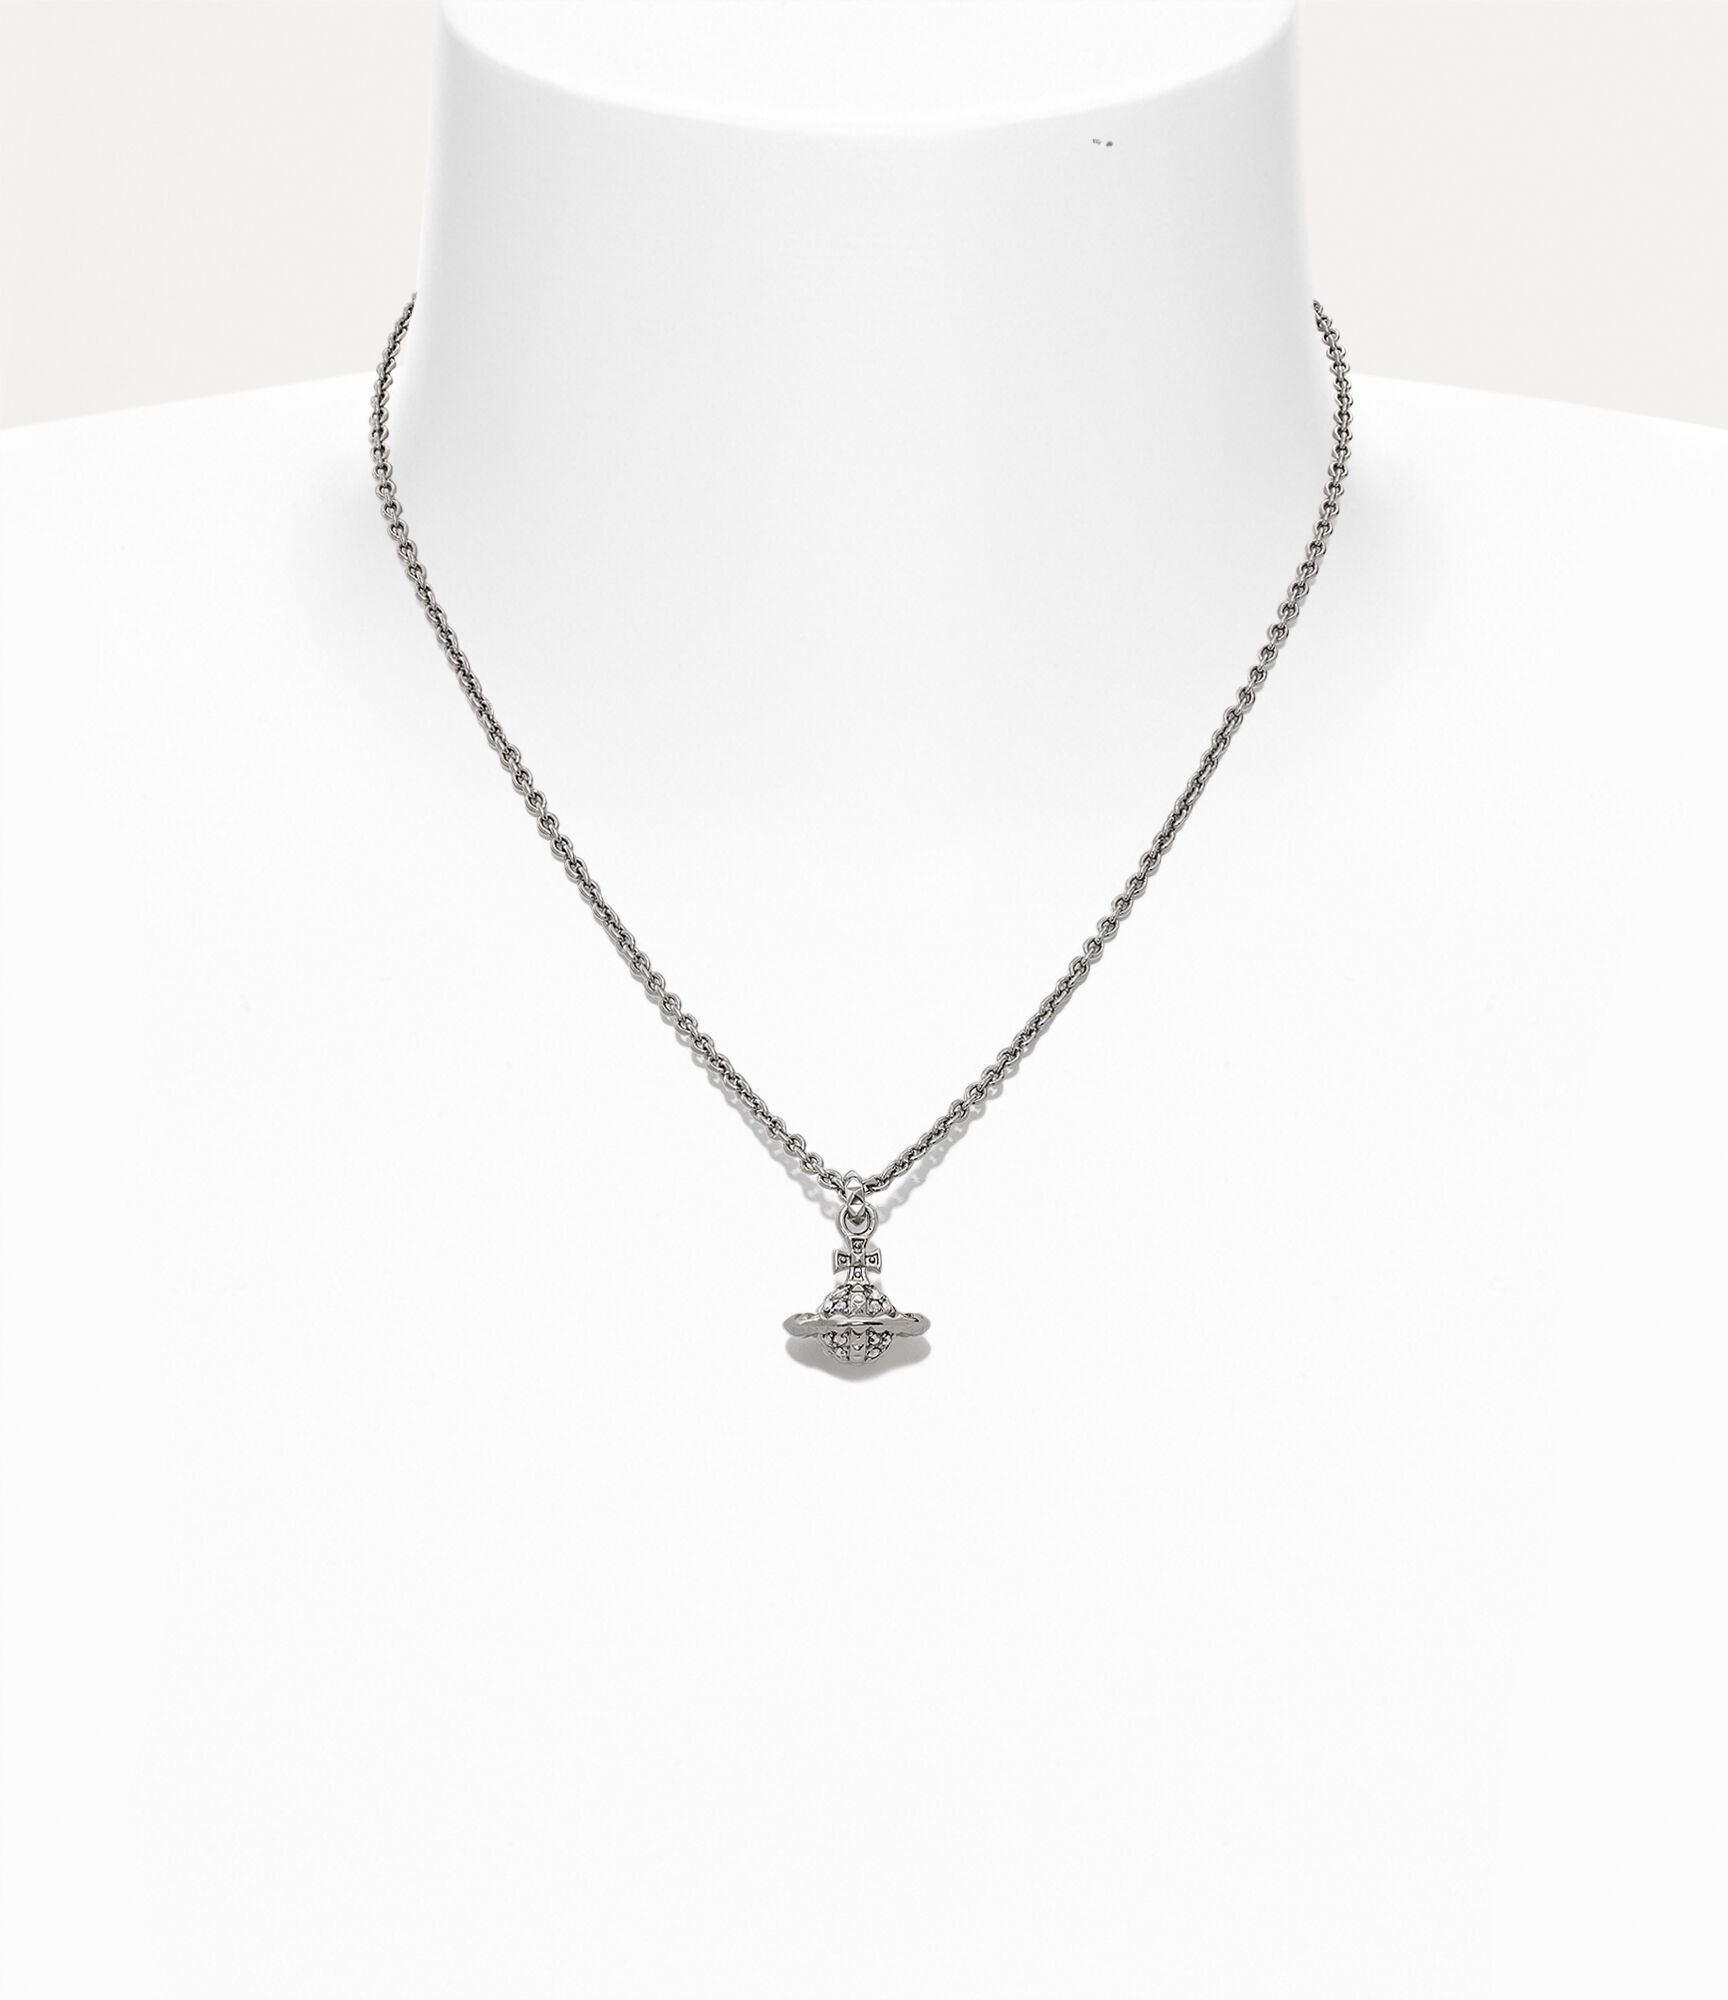 Vivienne Westwood Silver Orb Necklace With Dustbag - Etsy Israel